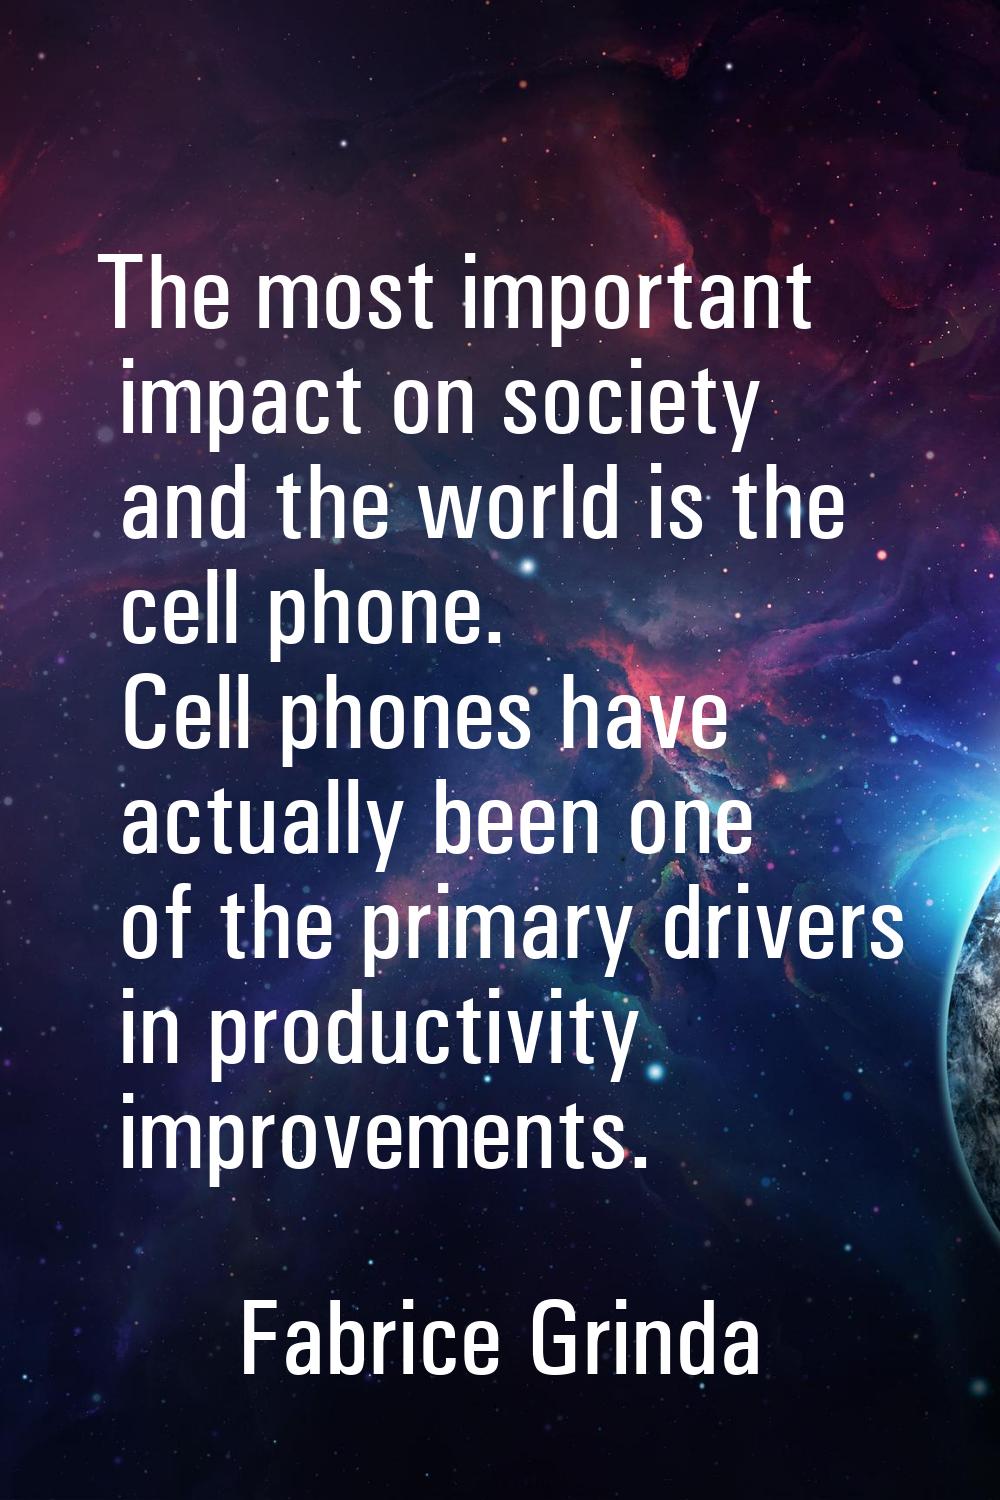 The most important impact on society and the world is the cell phone. Cell phones have actually bee